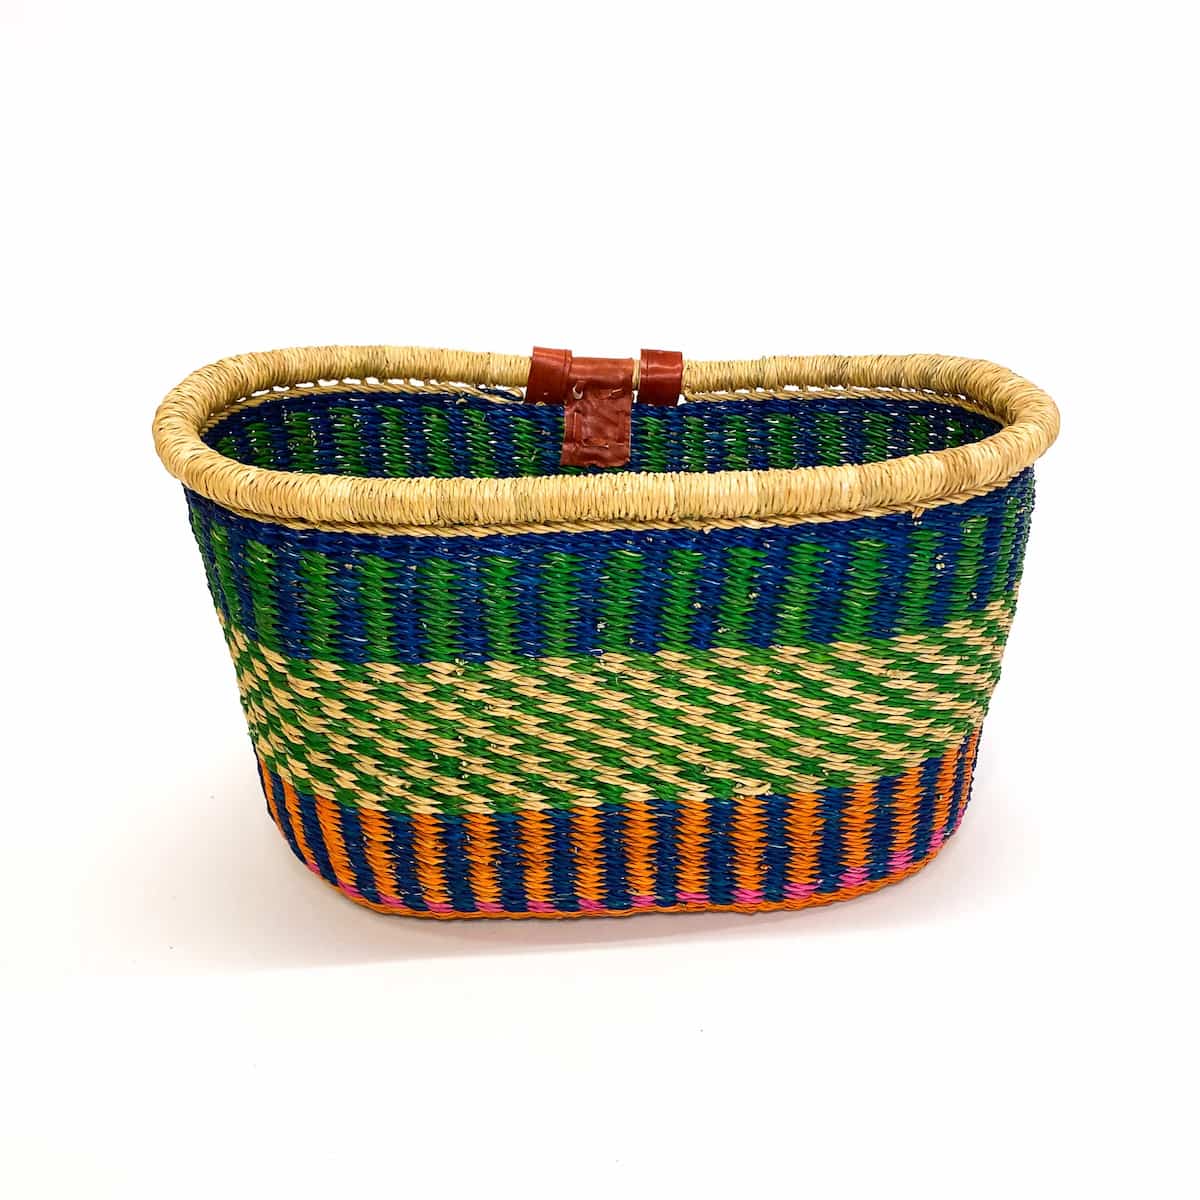 Bicycle Basket Blue and Green with Orange Base